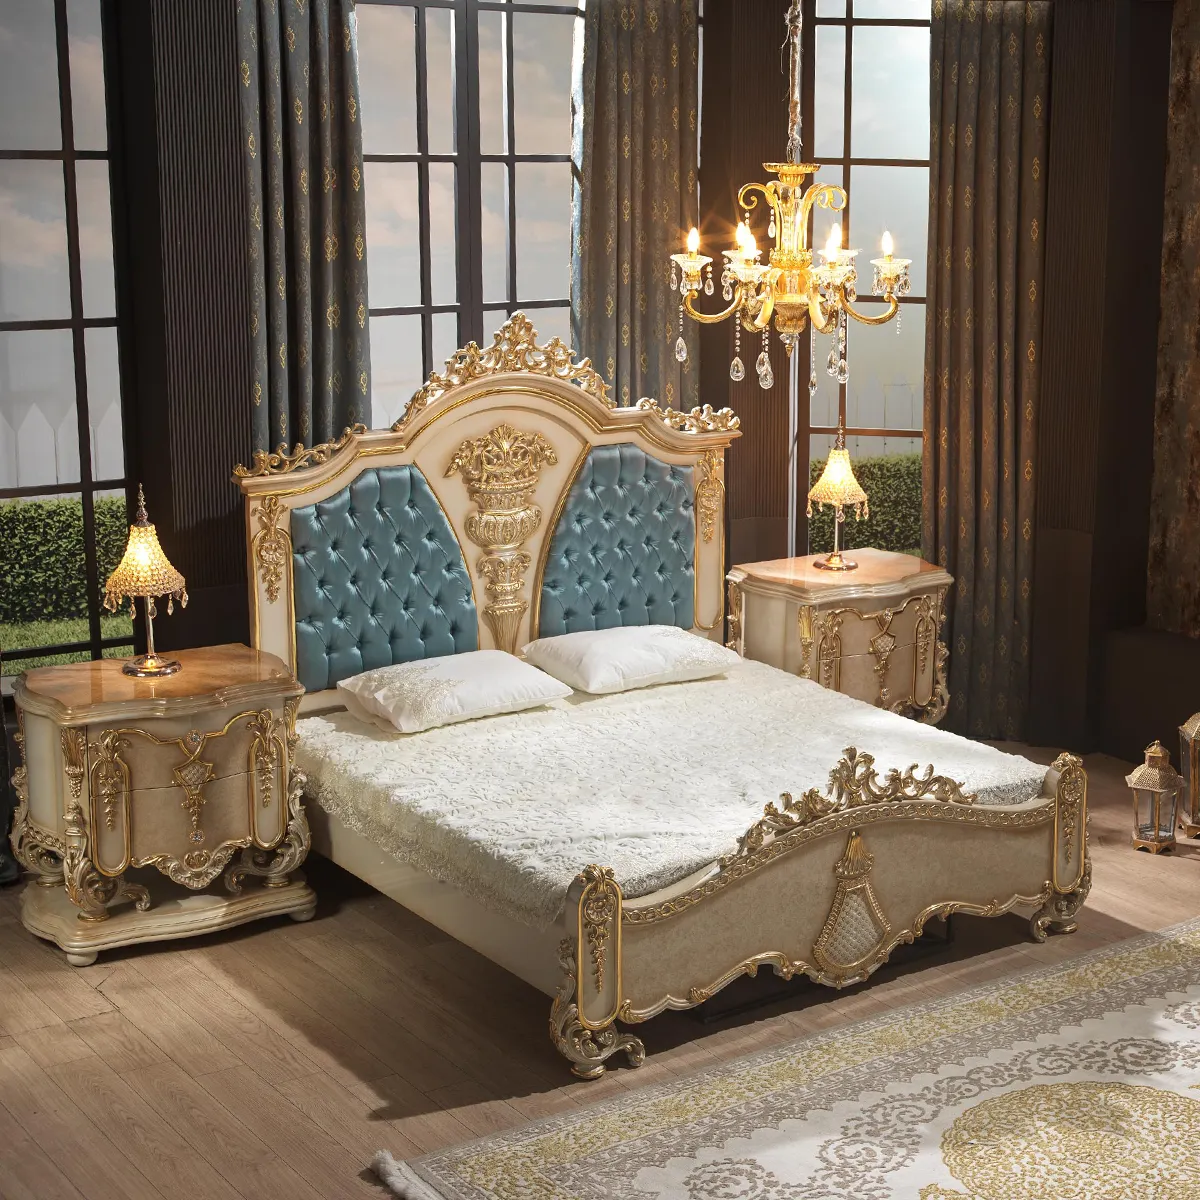 European Style King Size Beds Carved Royal French Italian Elegant Luxury Bedroom Furniture Luxury home furniture bedroom set